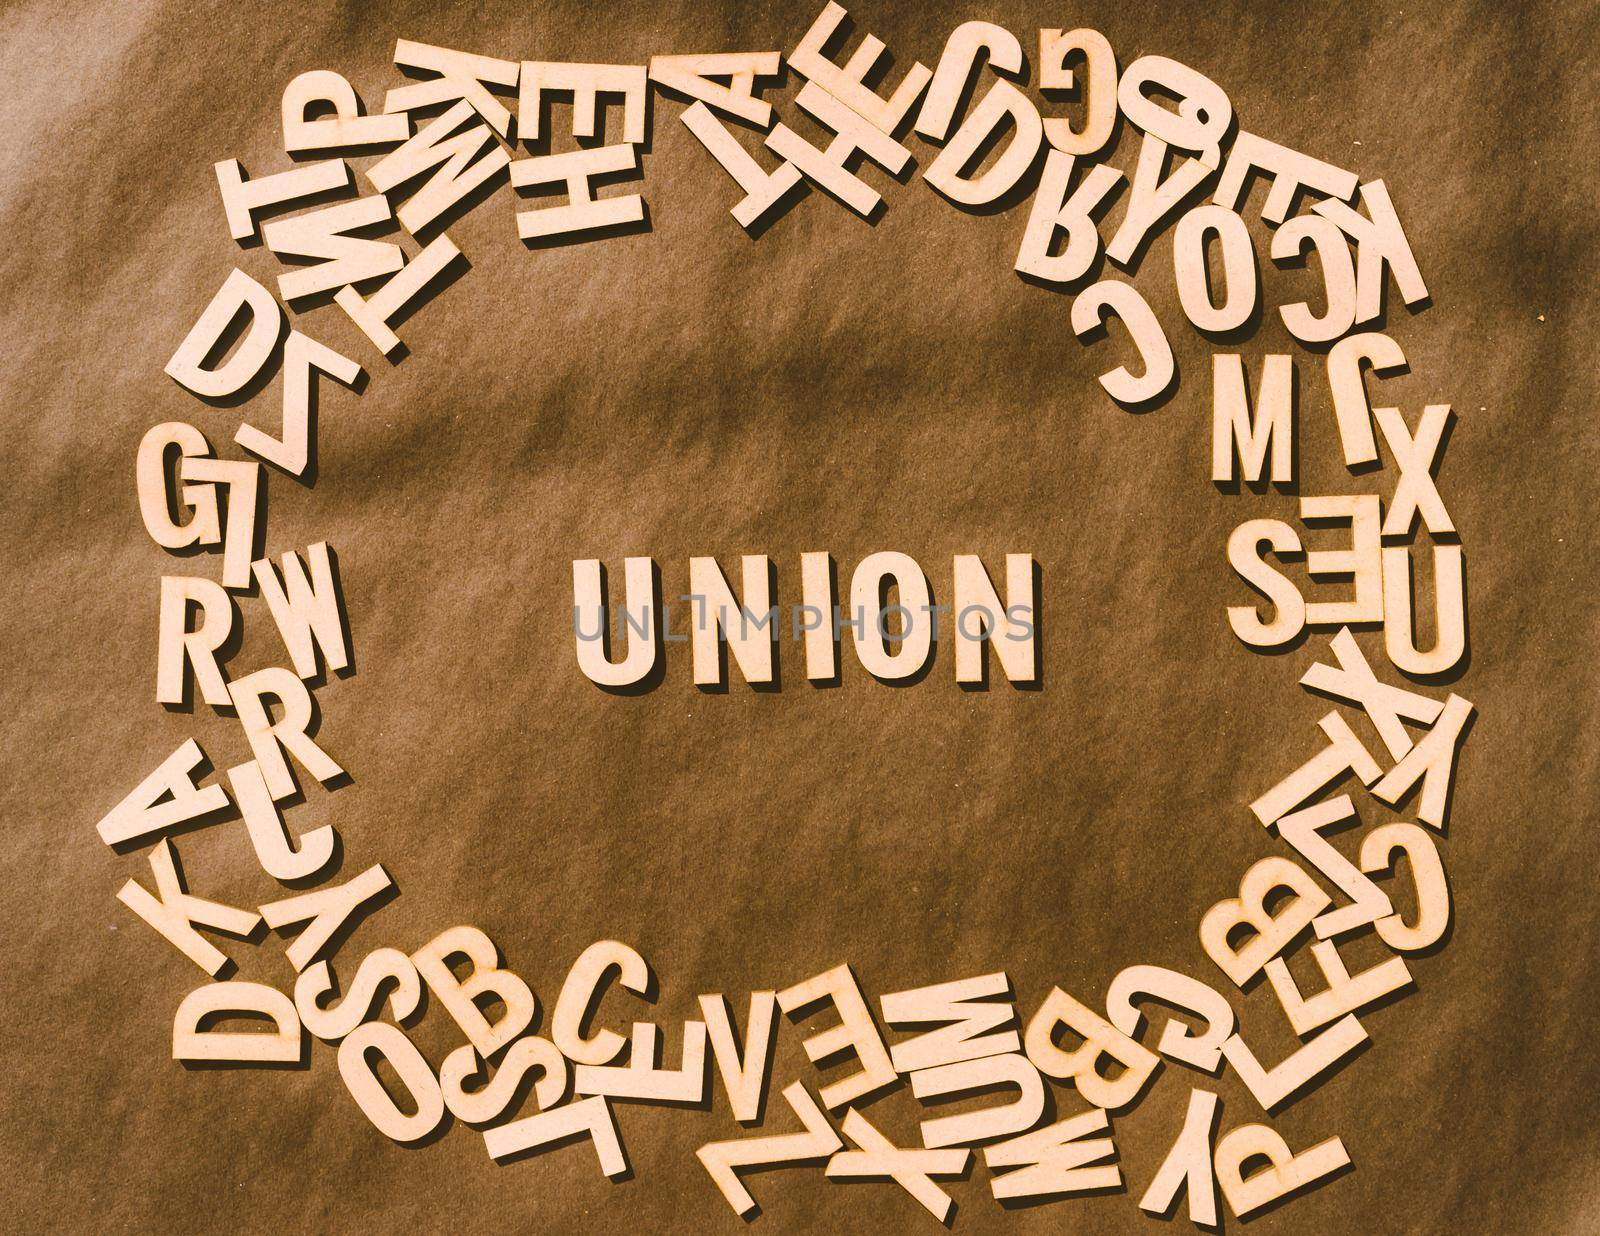 Union Word In Wooden Cube Alphabet Letters Top View On A rustic paper Background.